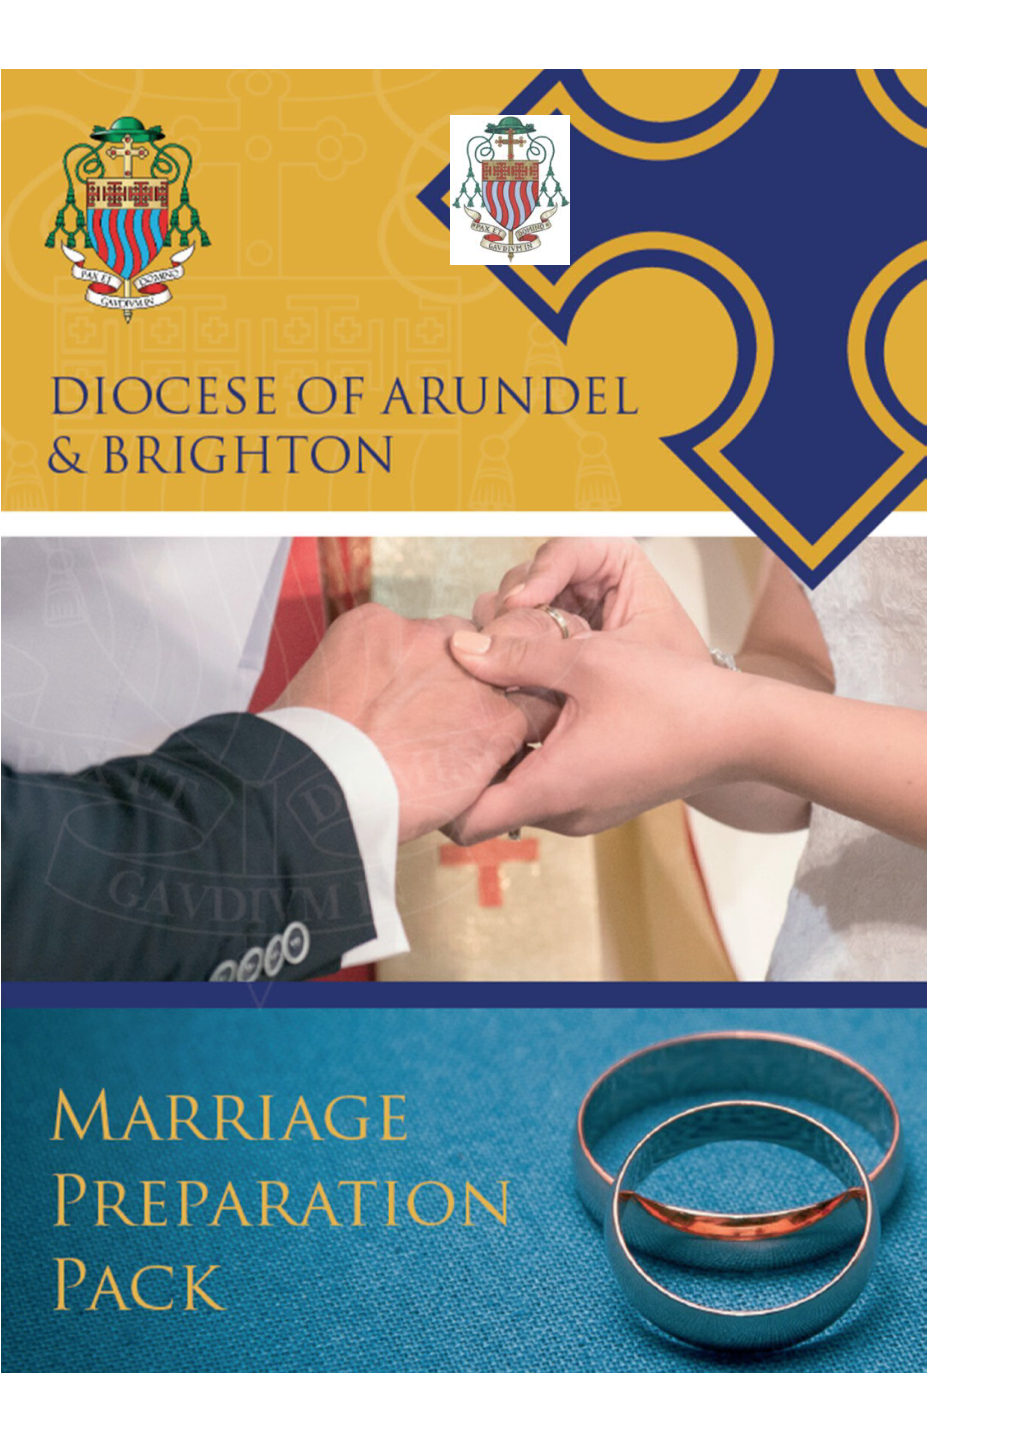 The Distinction the Church Maintains Between Engagement and Marriage Is Precisely to Protect